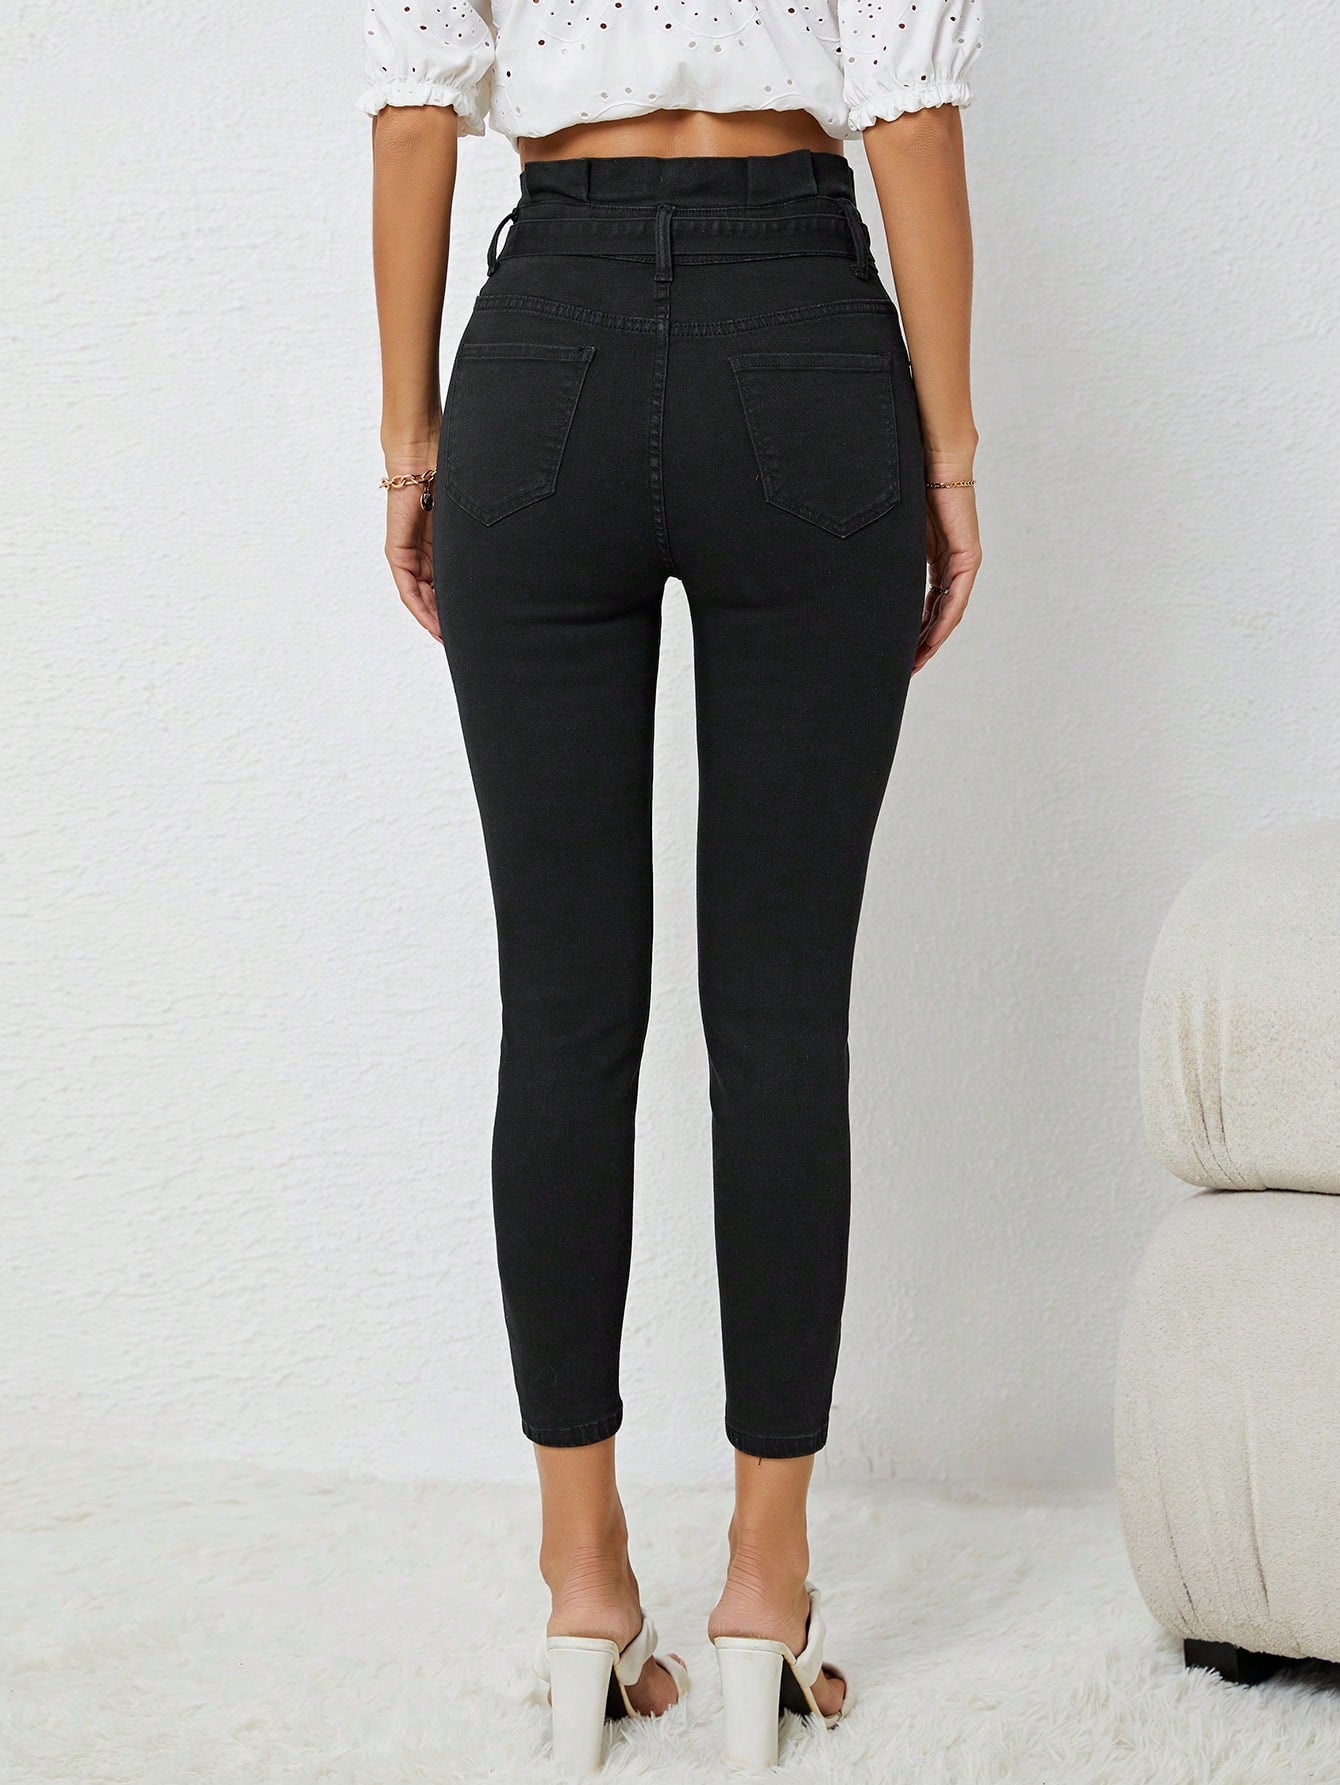 High Waist Belted Skinny Jeans